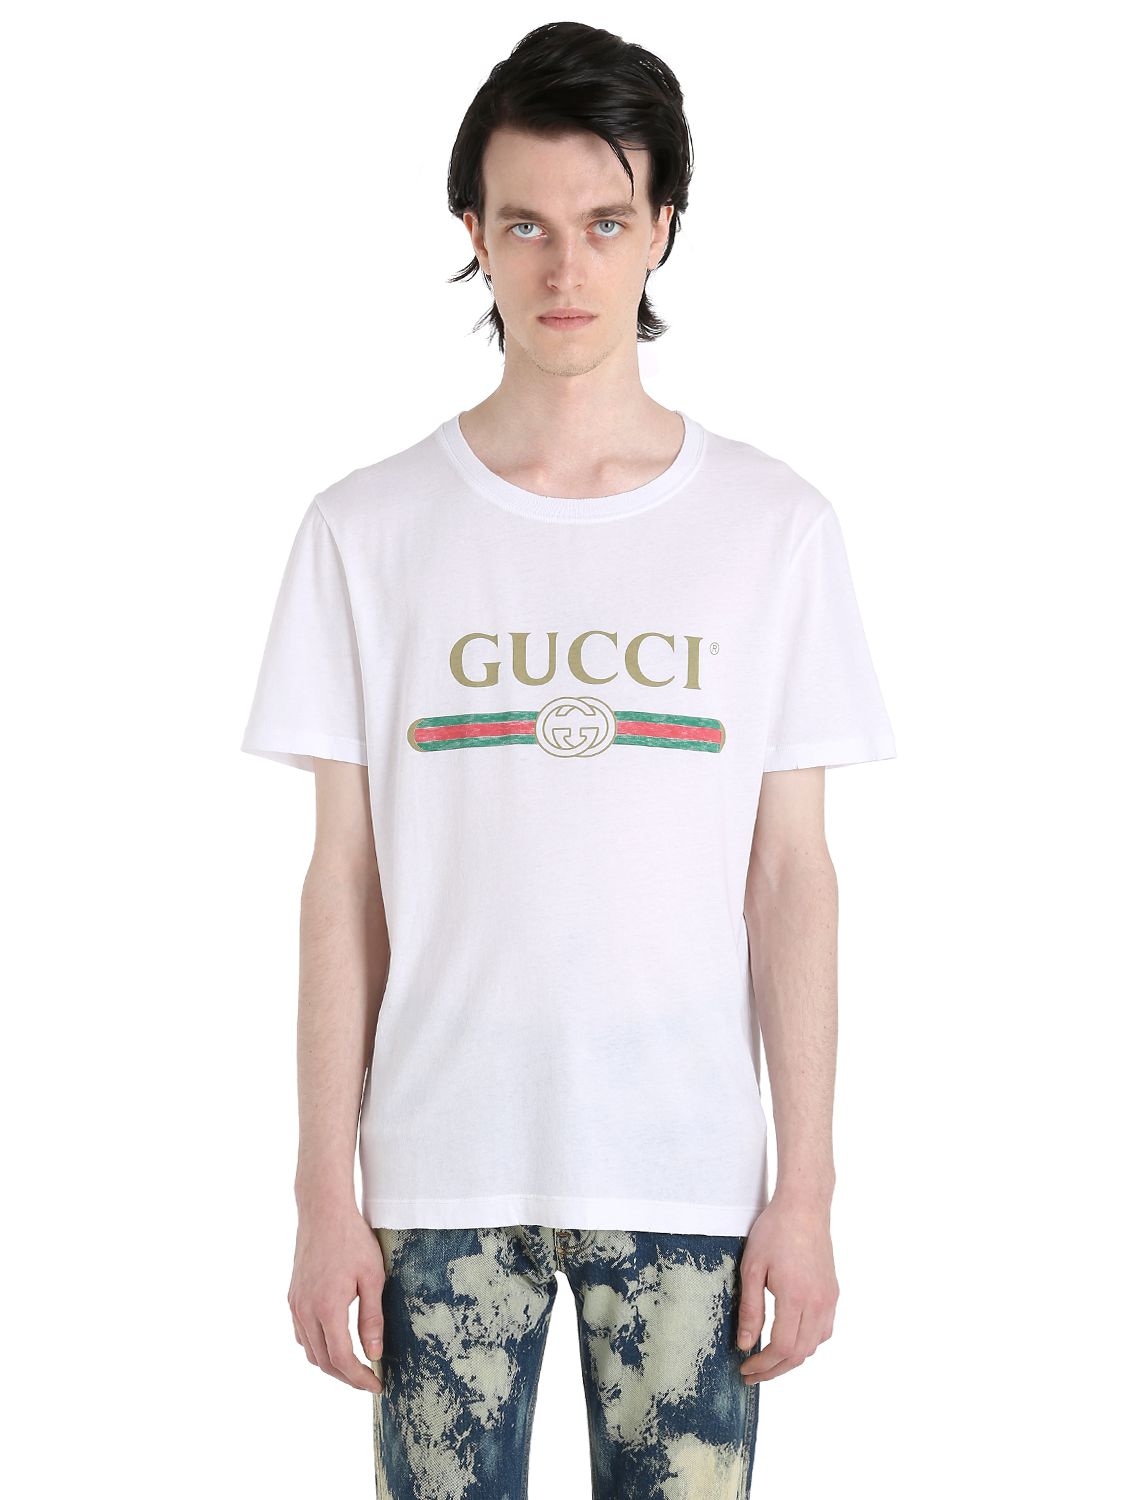 Gucci t shirt made in turkey business, Free women's t shirt pattern, short homecoming dresses with pockets. 